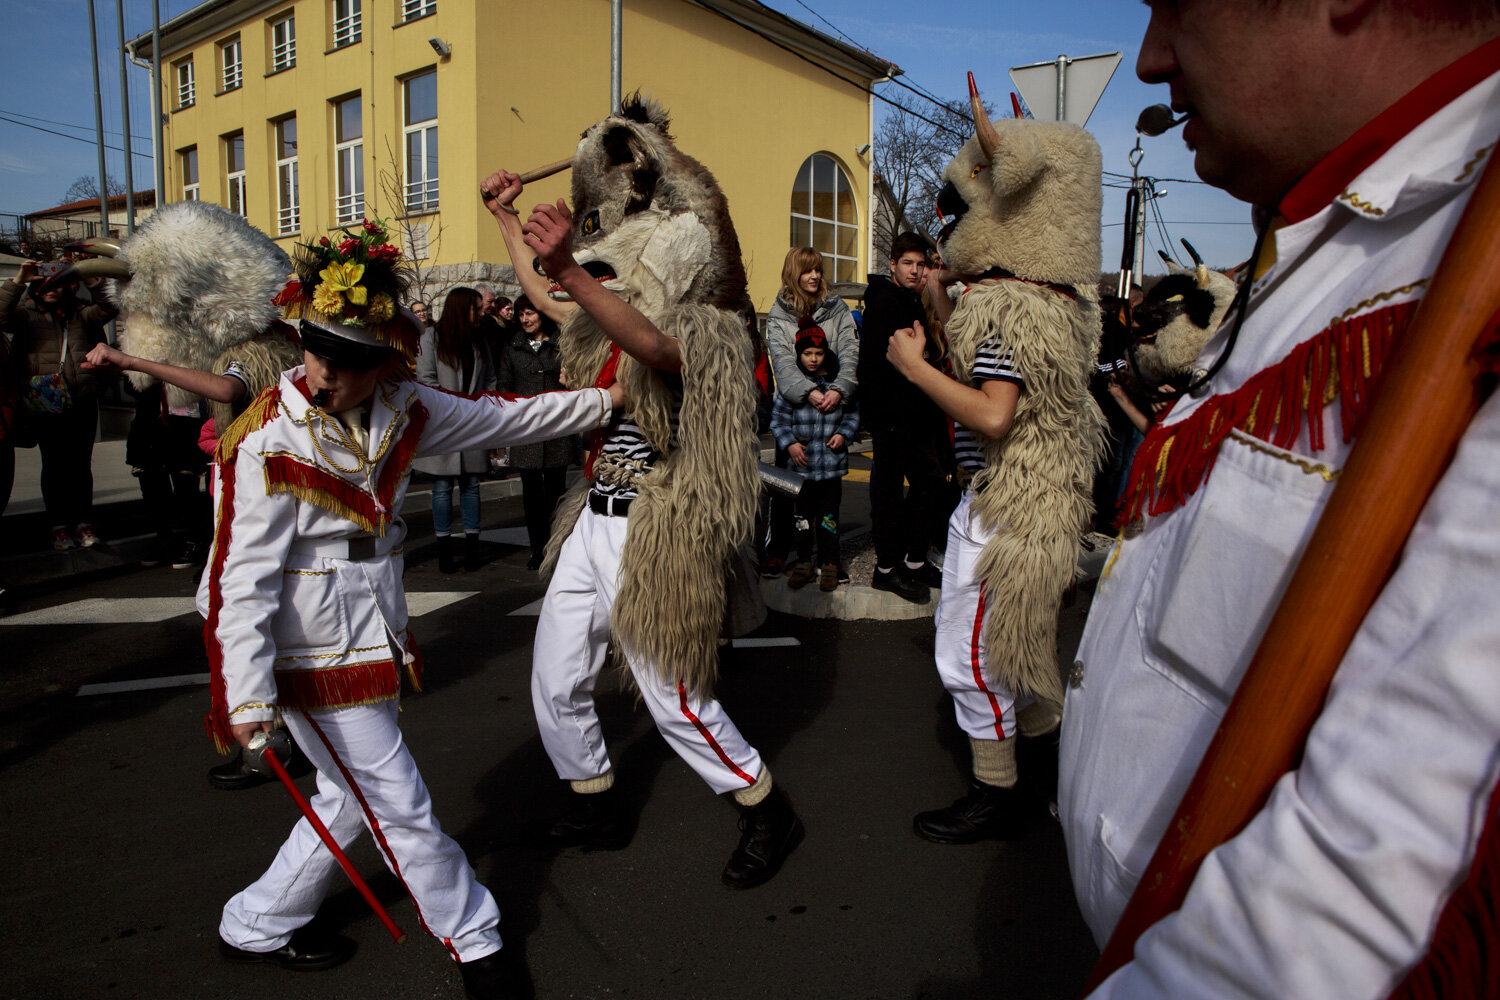  Halubajski zvončari, traditional bell ringers based on mythical creatures in Croatian folklore, are led through villages in the Viskovo region near Rijeka, Croatia on Sunday, Feb. 23, 2020. Though Carnival is celebrated throughout Croatia, this grou